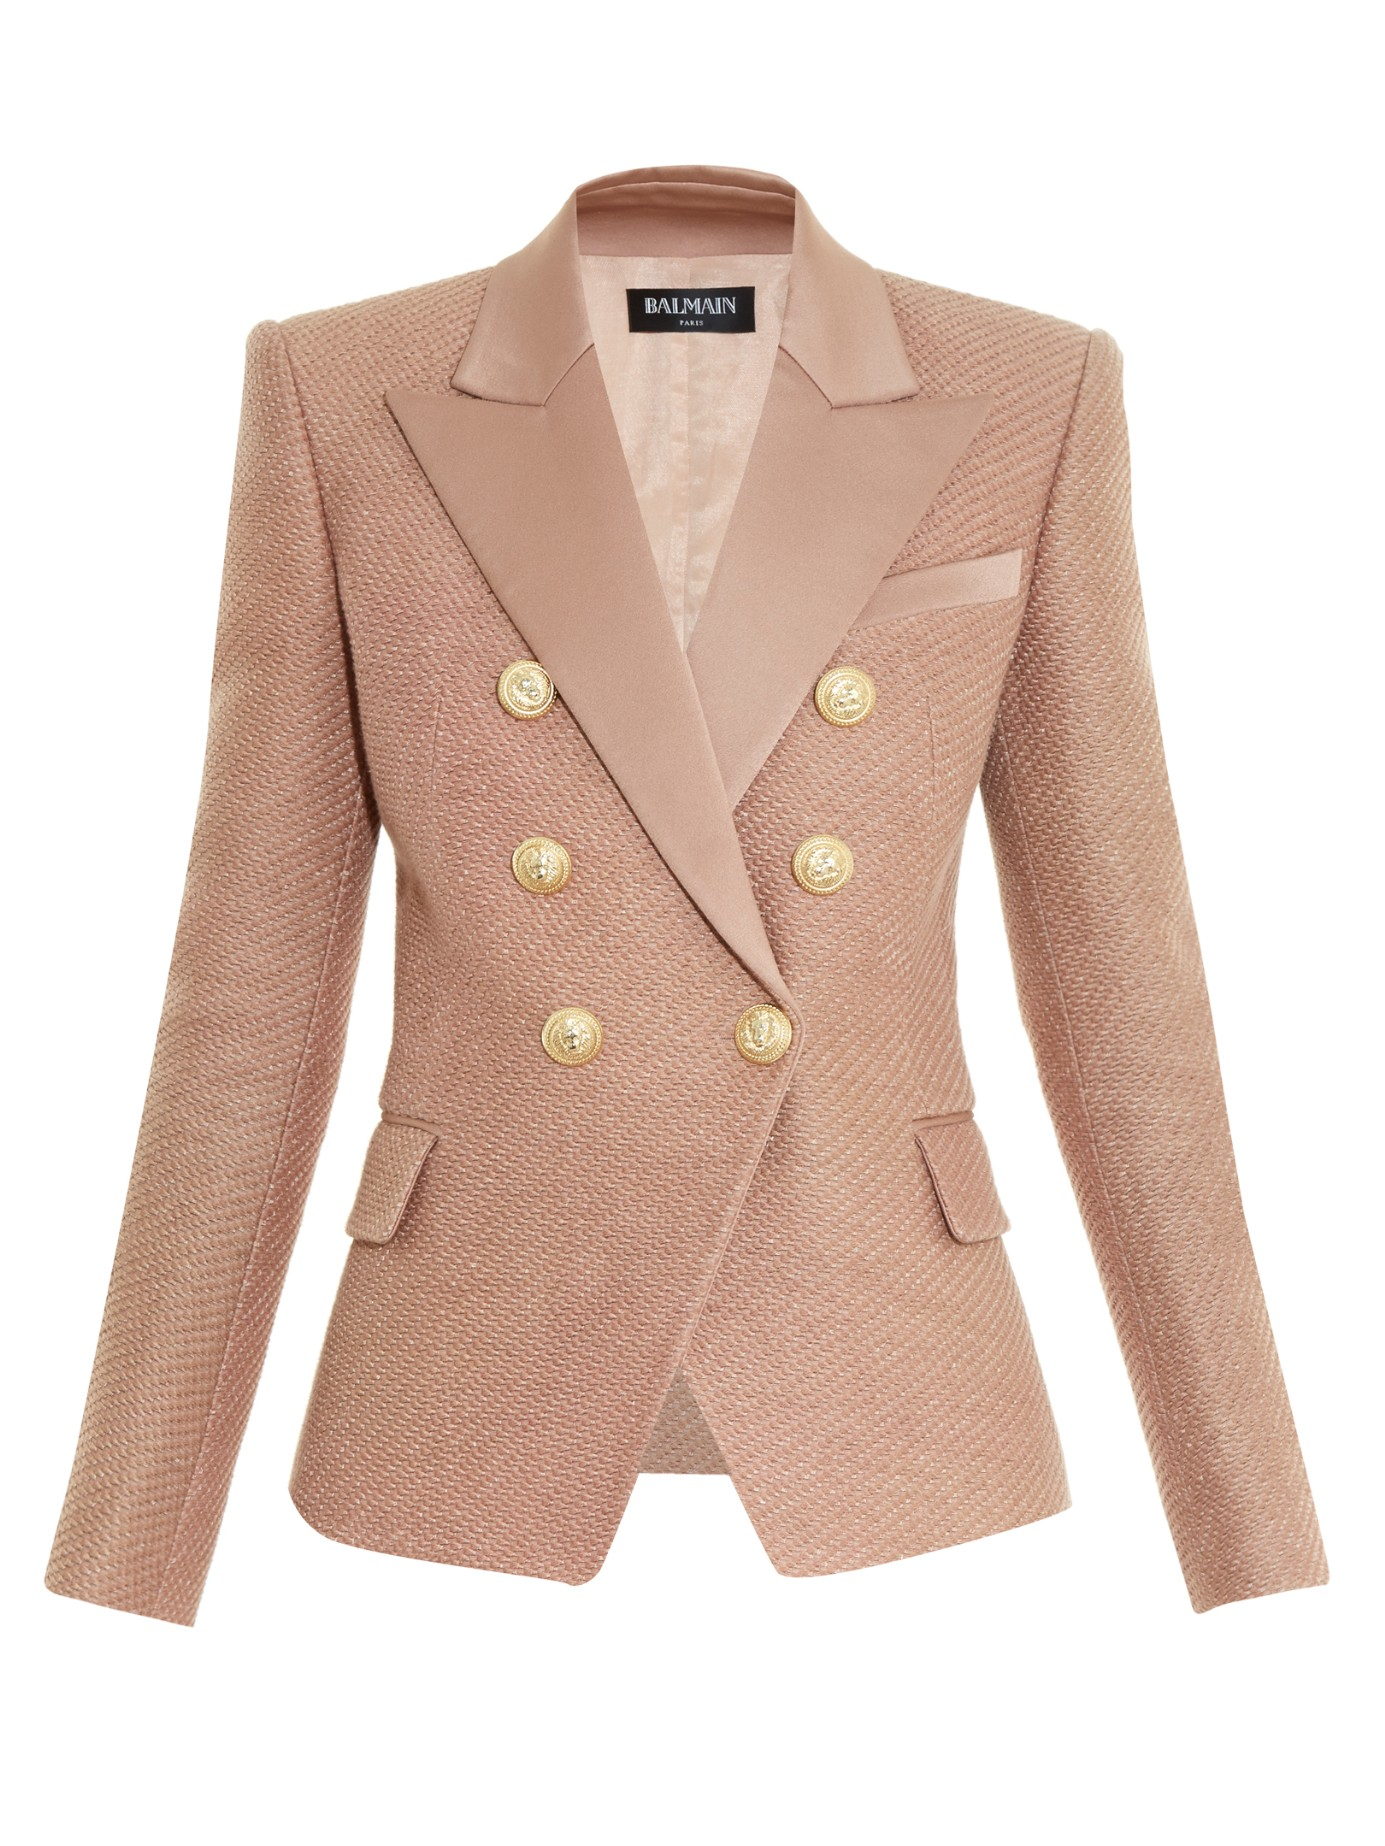 Balmain Double-Breasted Tailored Cotton Jacket in Nude (Natural) - Lyst